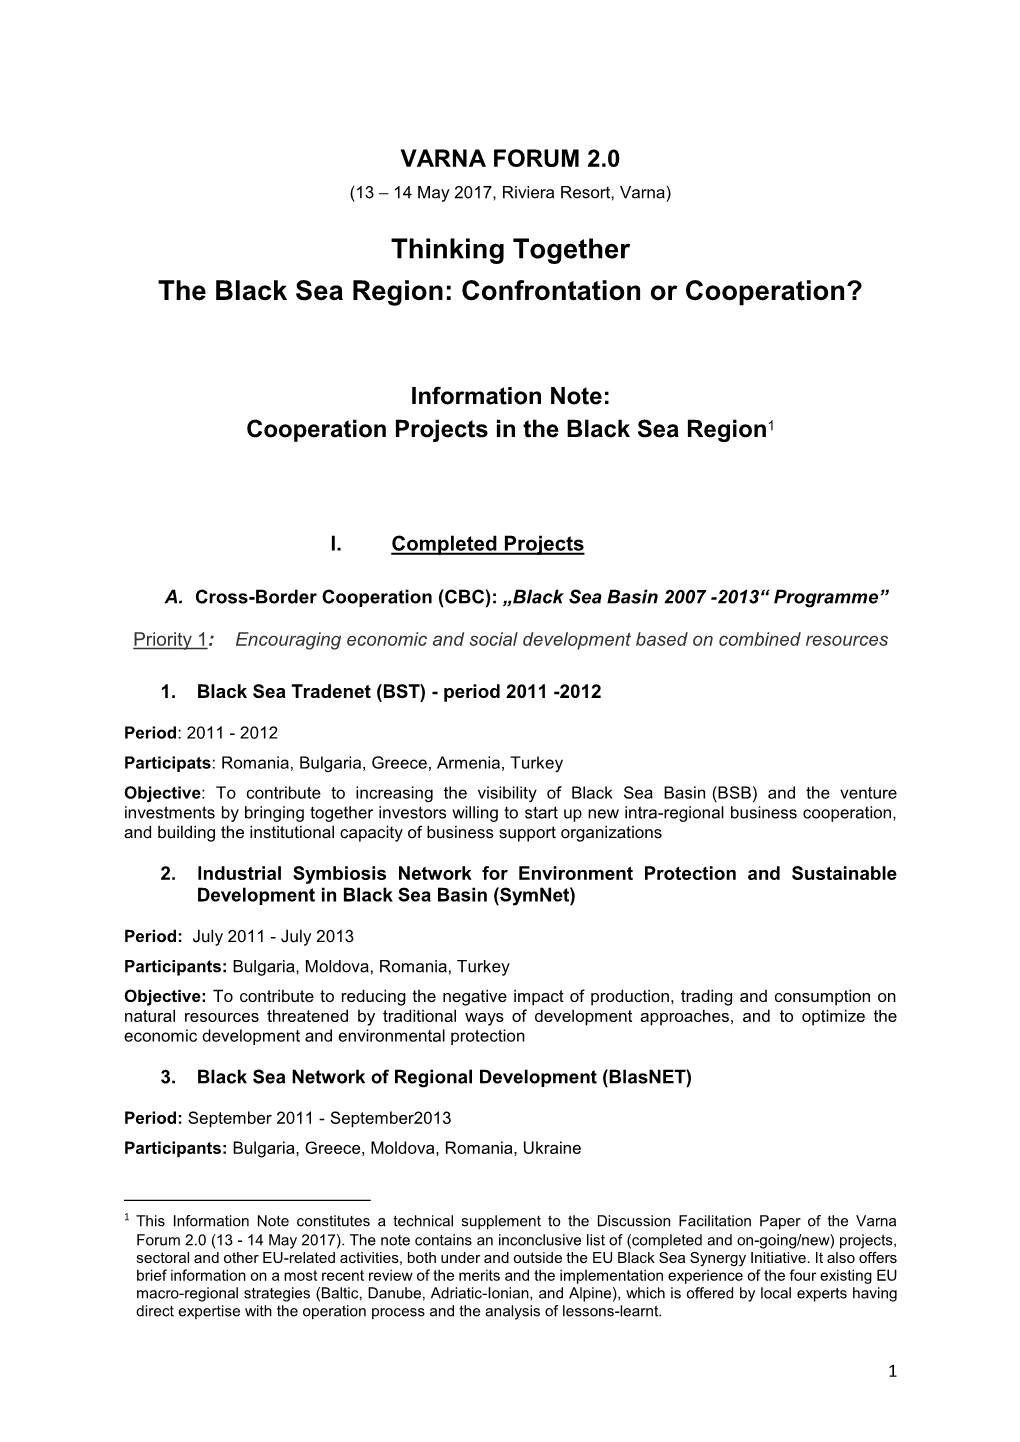 Thinking Together the Black Sea Region: Confrontation Or Cooperation?